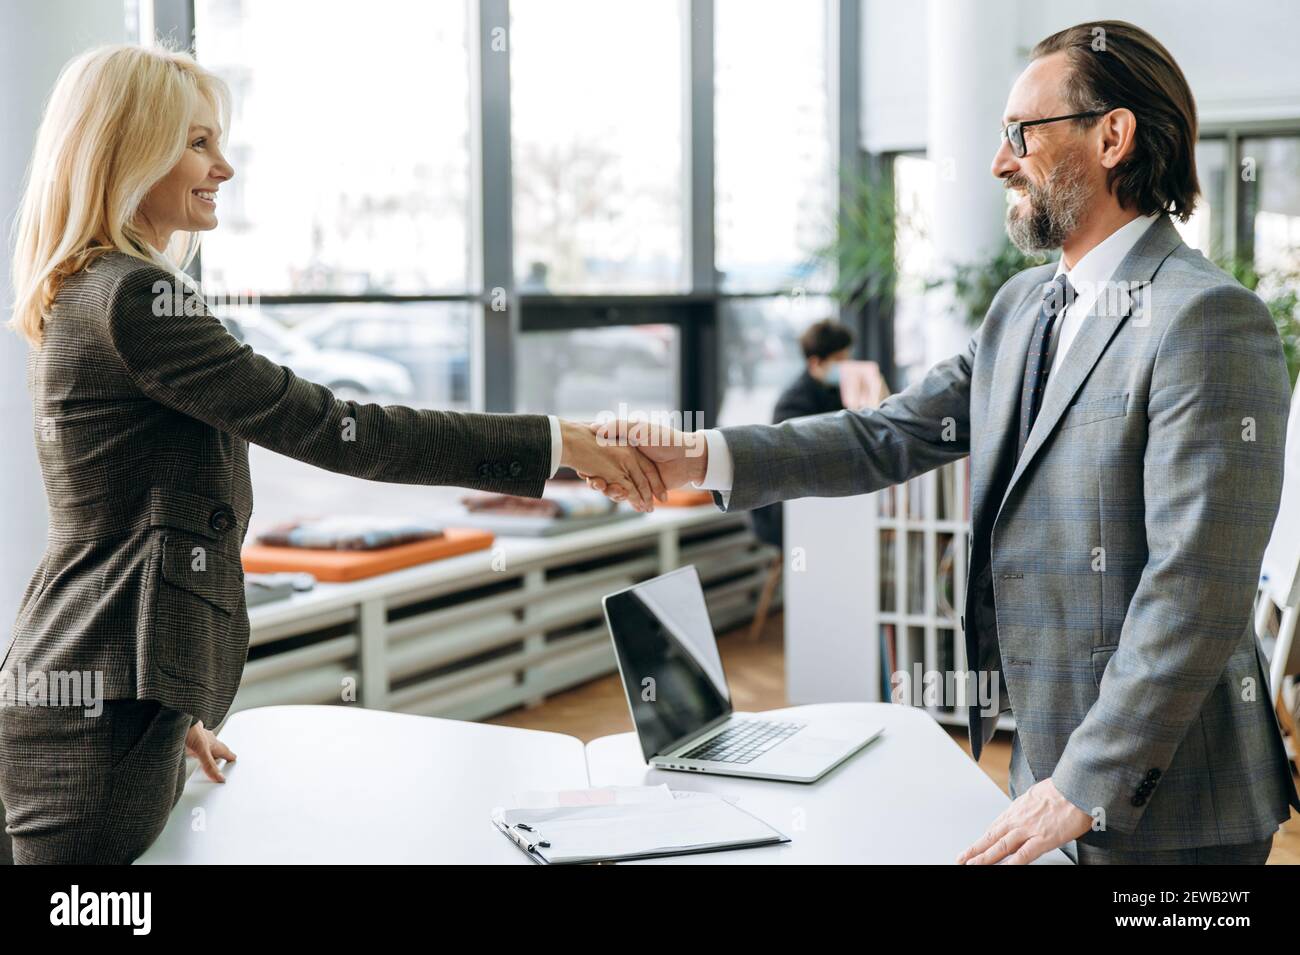 Successful middle aged colleagues are standing in modern office, coming to agreement at conference. Satisfied business partners shaking hands after negotiations Stock Photo